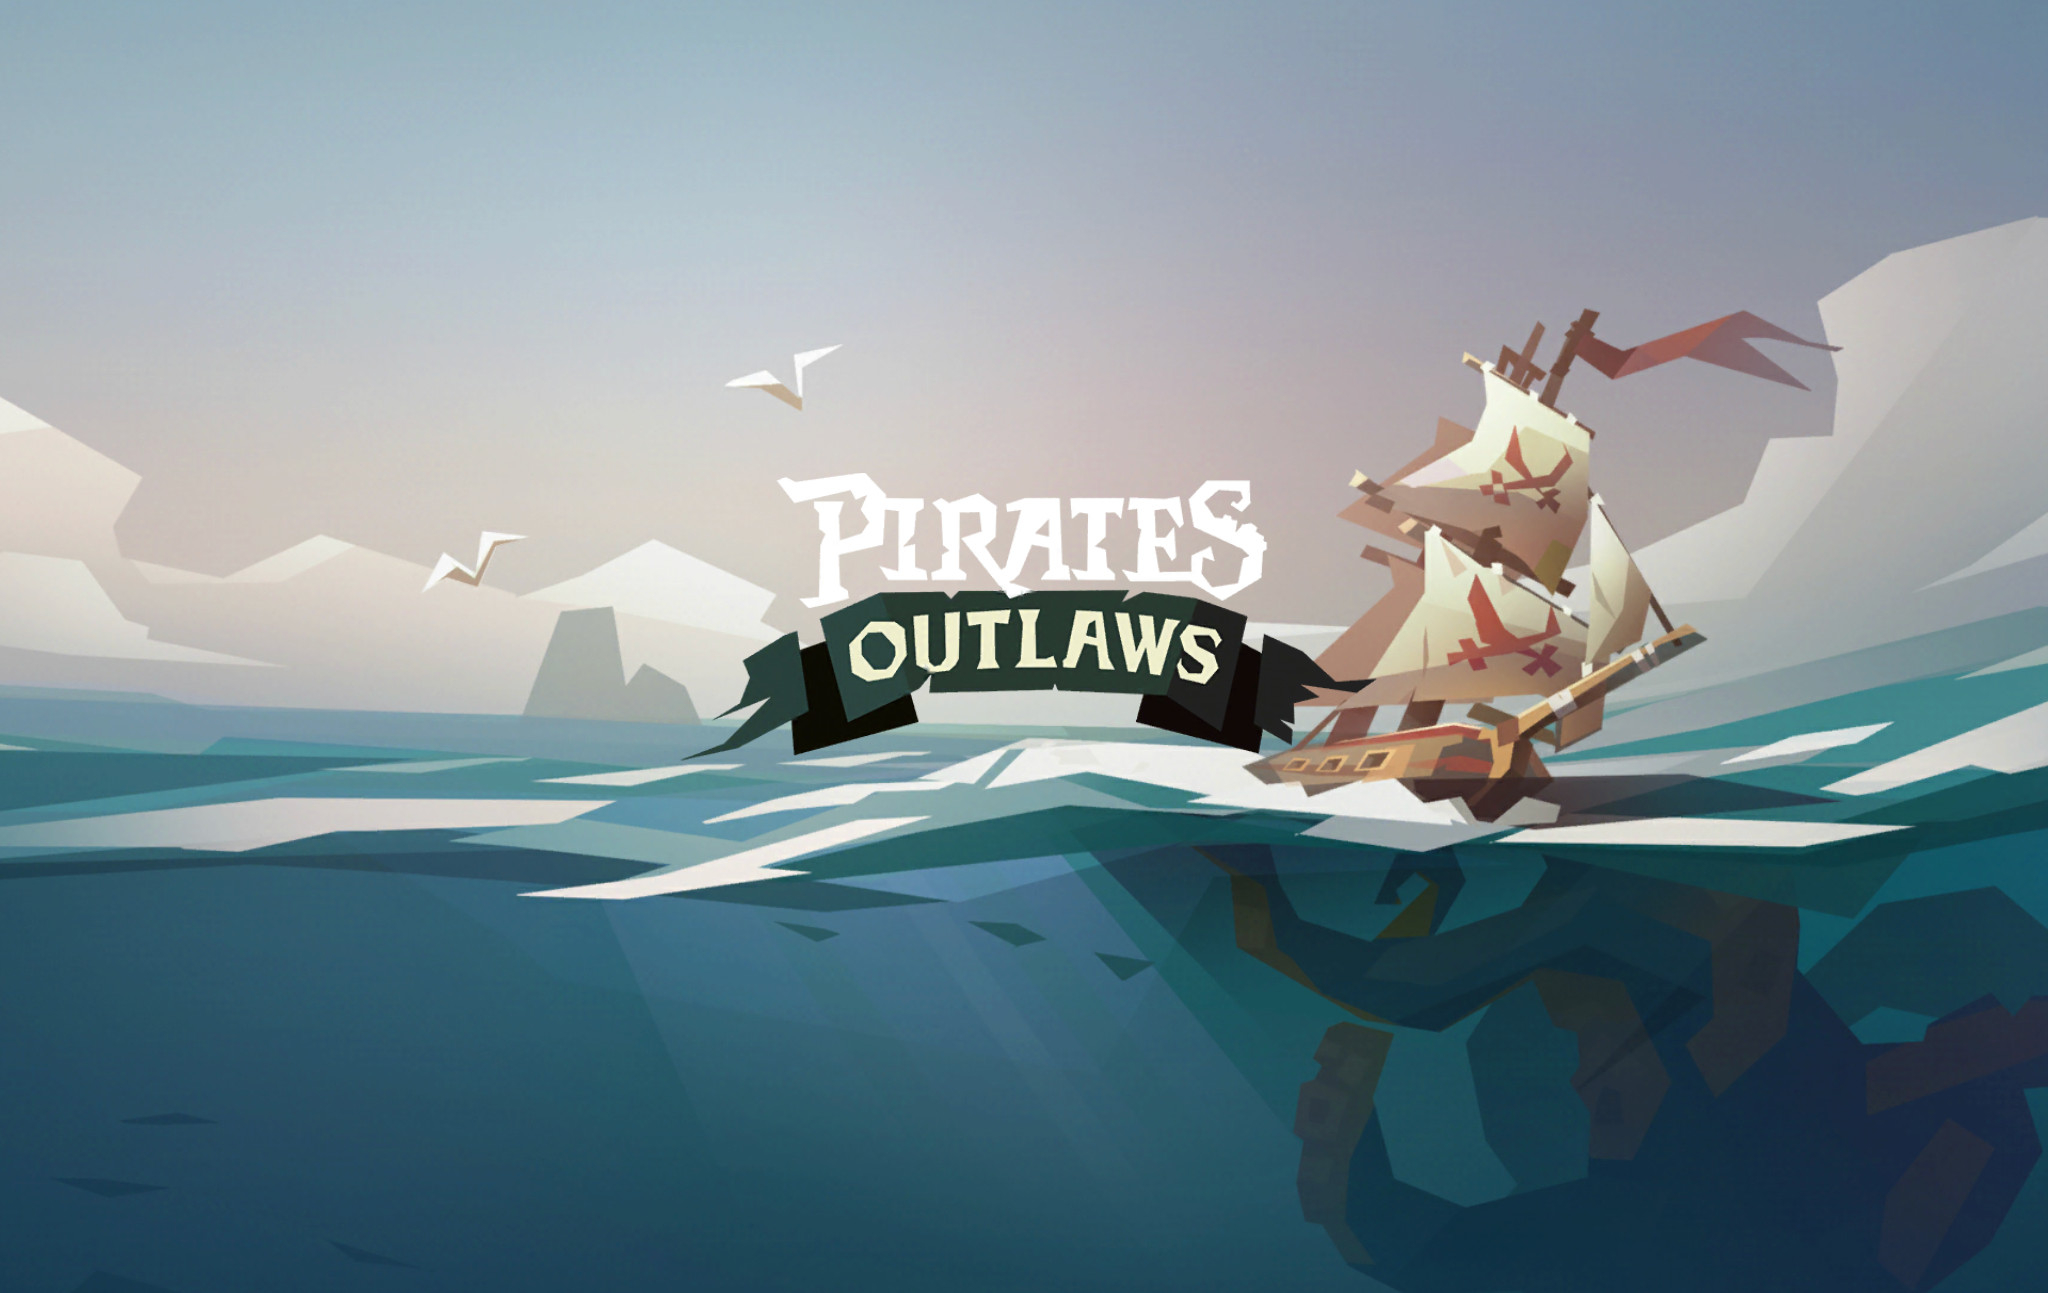 Pirates outlaws steam фото 25